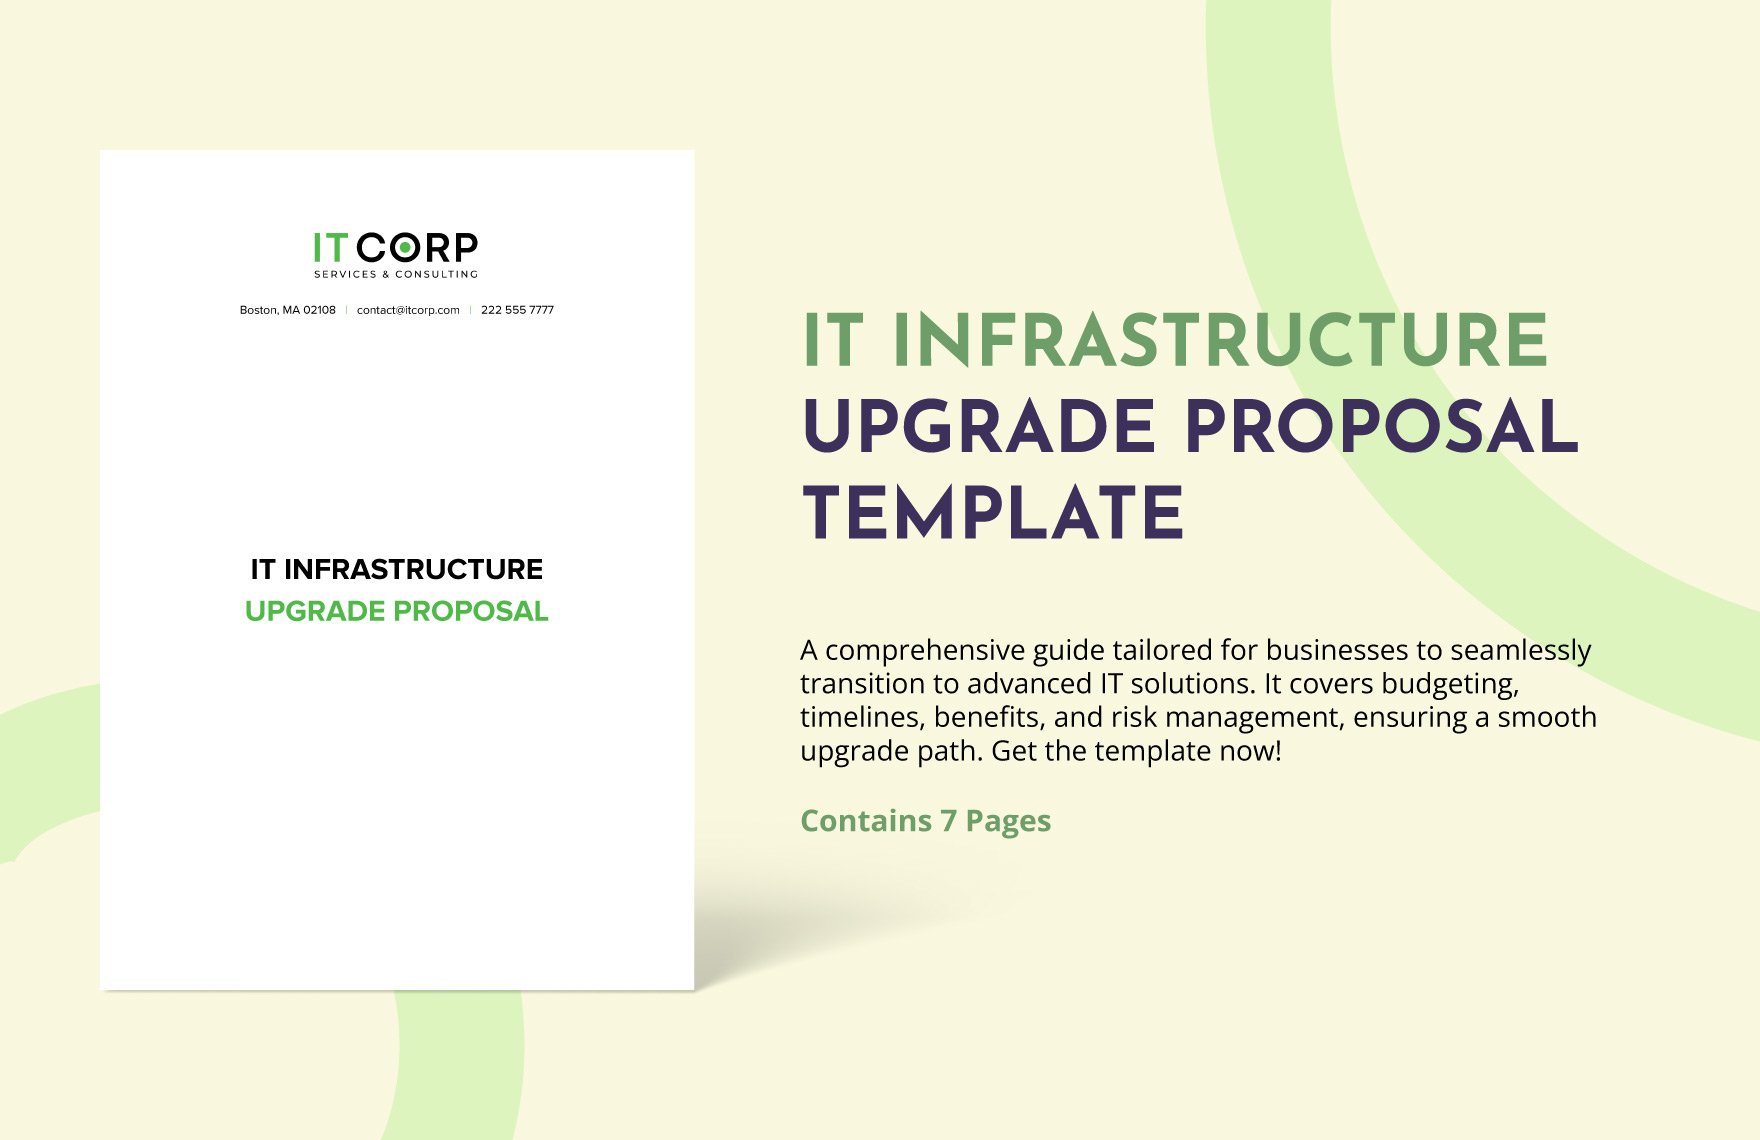 IT Infrastructure Upgrade Proposal Template